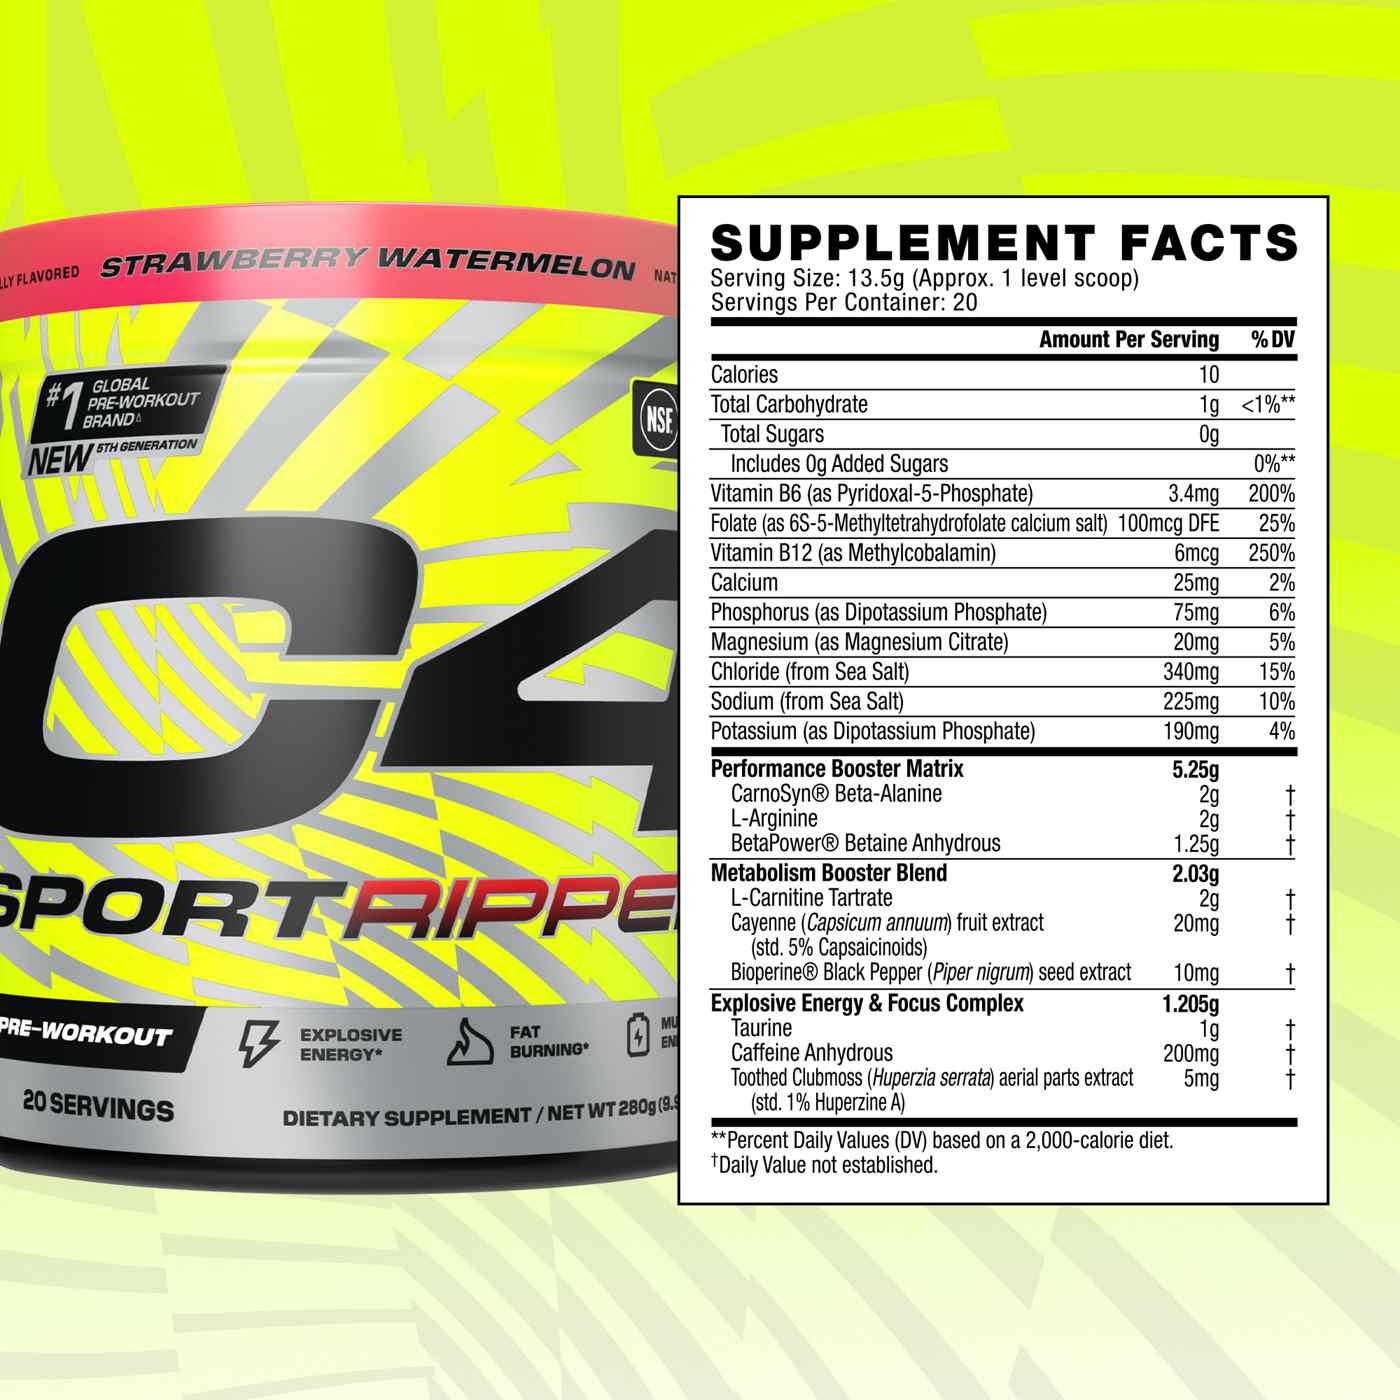 Cellucor C4 Sport Pre-Workout - Ripped Strawberry Watermelon; image 8 of 8